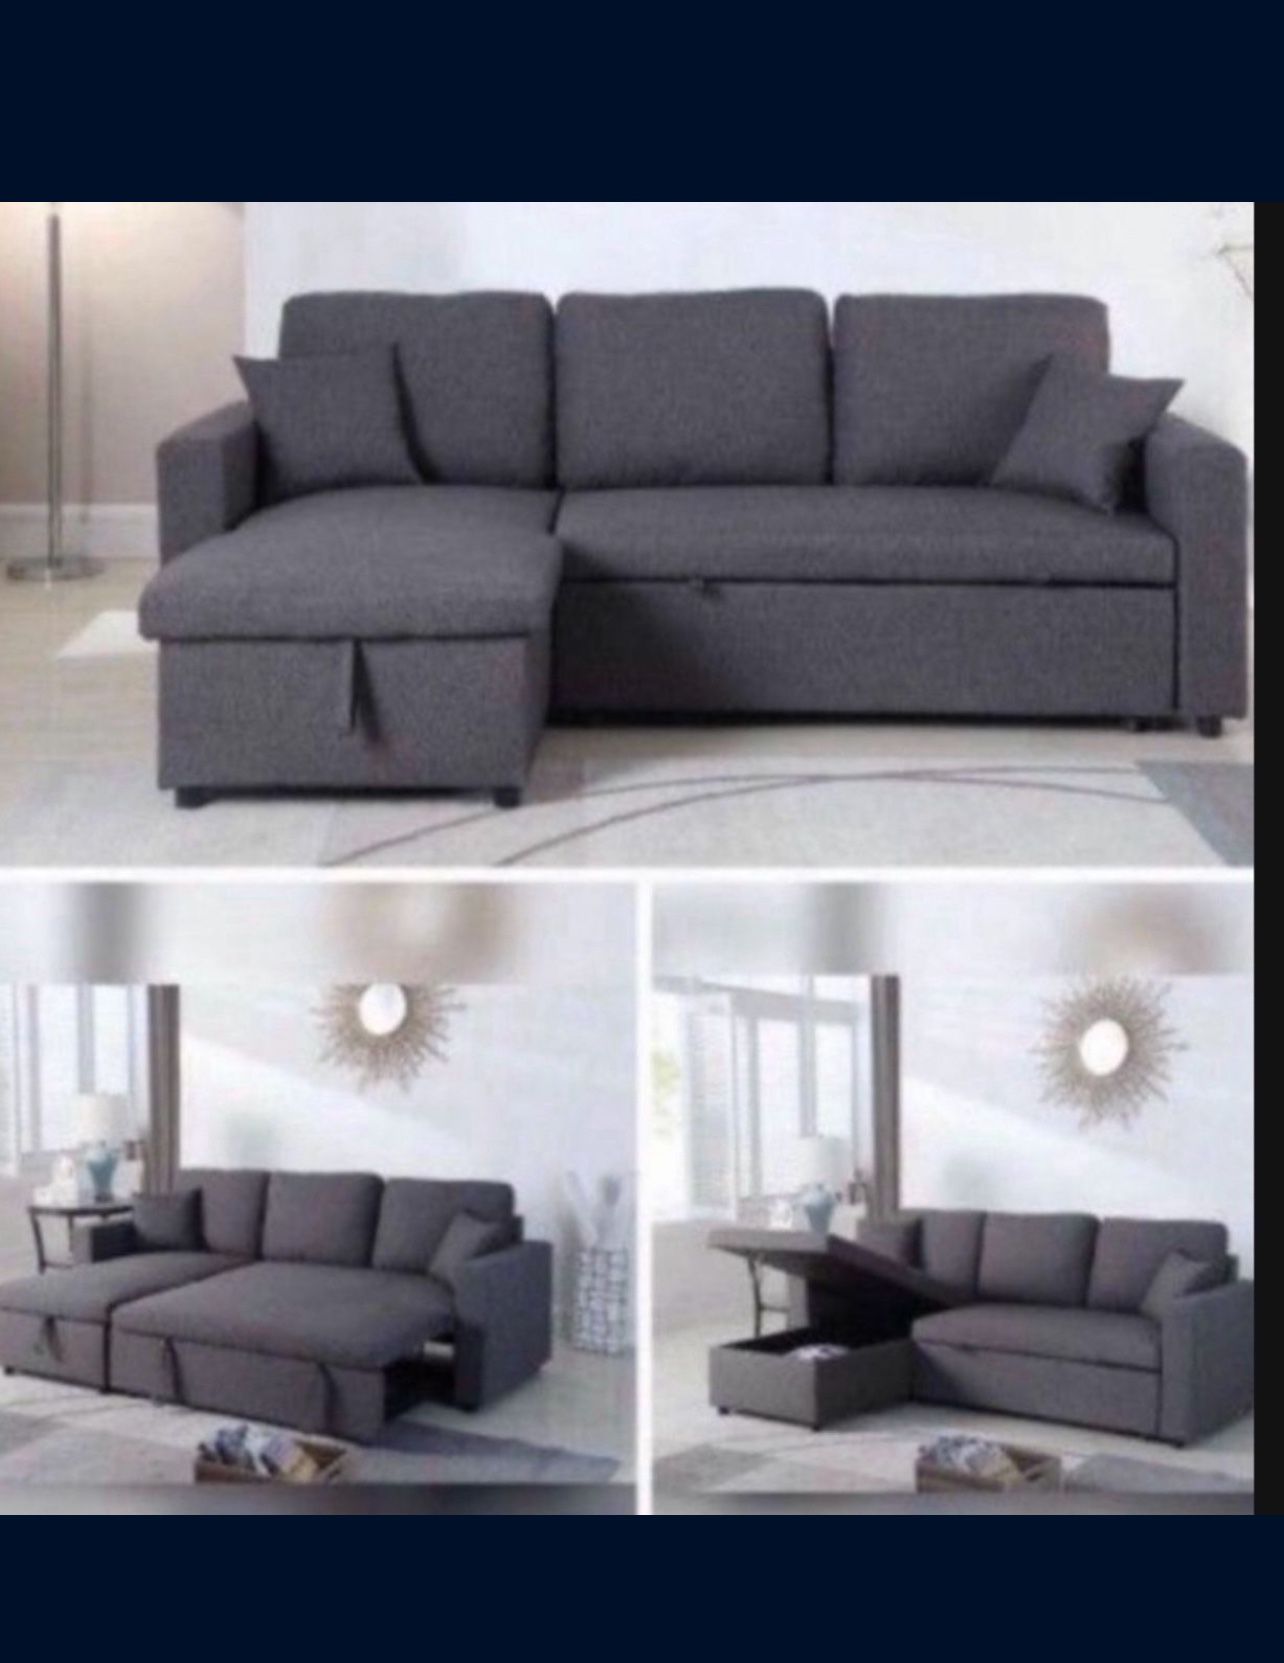 Living room set Sectional Sofa Pullout Bed W / Chaise Storage Fabric 88” X 57” x33”H. Reversible 